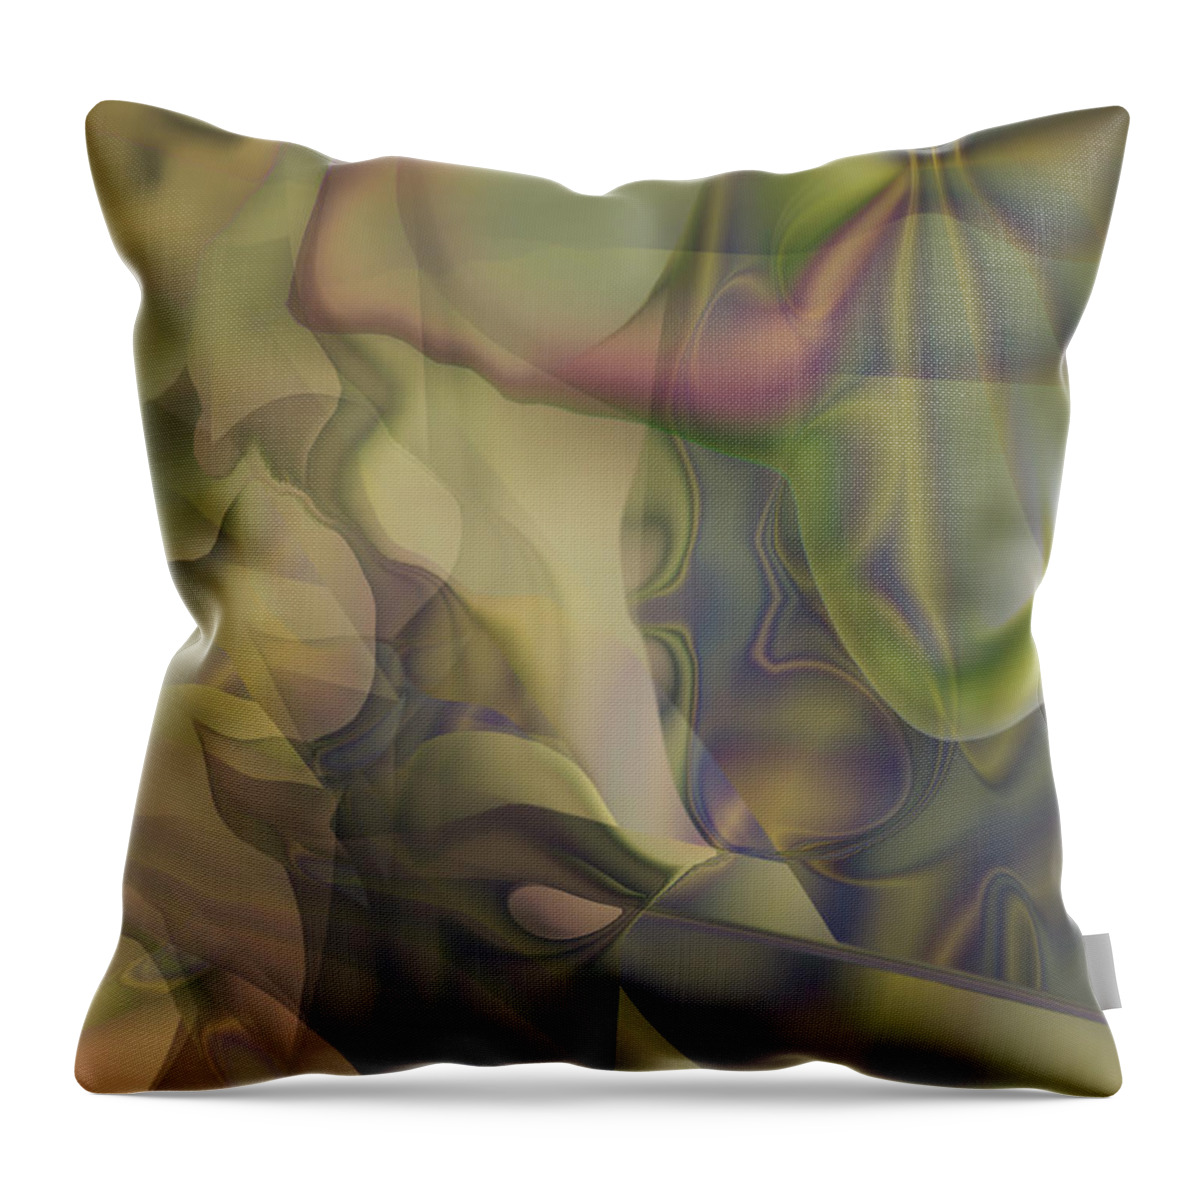 Mighty Sight Studio Surrealism Abstractions Fantasy Art Throw Pillow featuring the digital art Murdering Crows by Steve Sperry